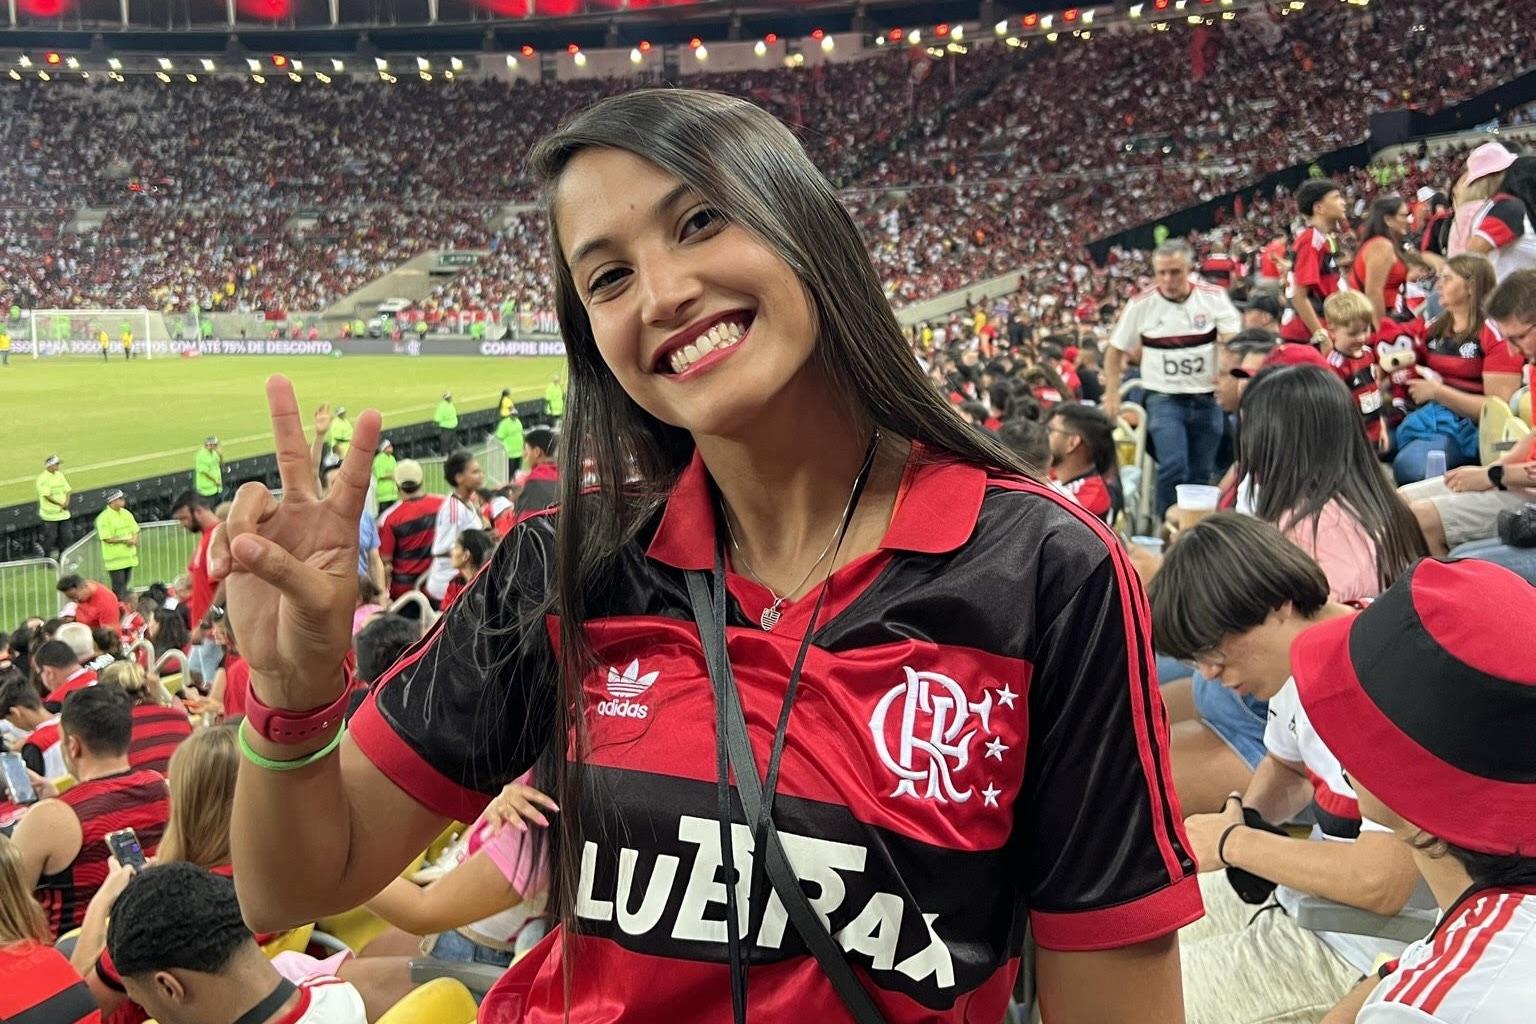 Flavia attends a Flamengo game in Brazil, her home country.